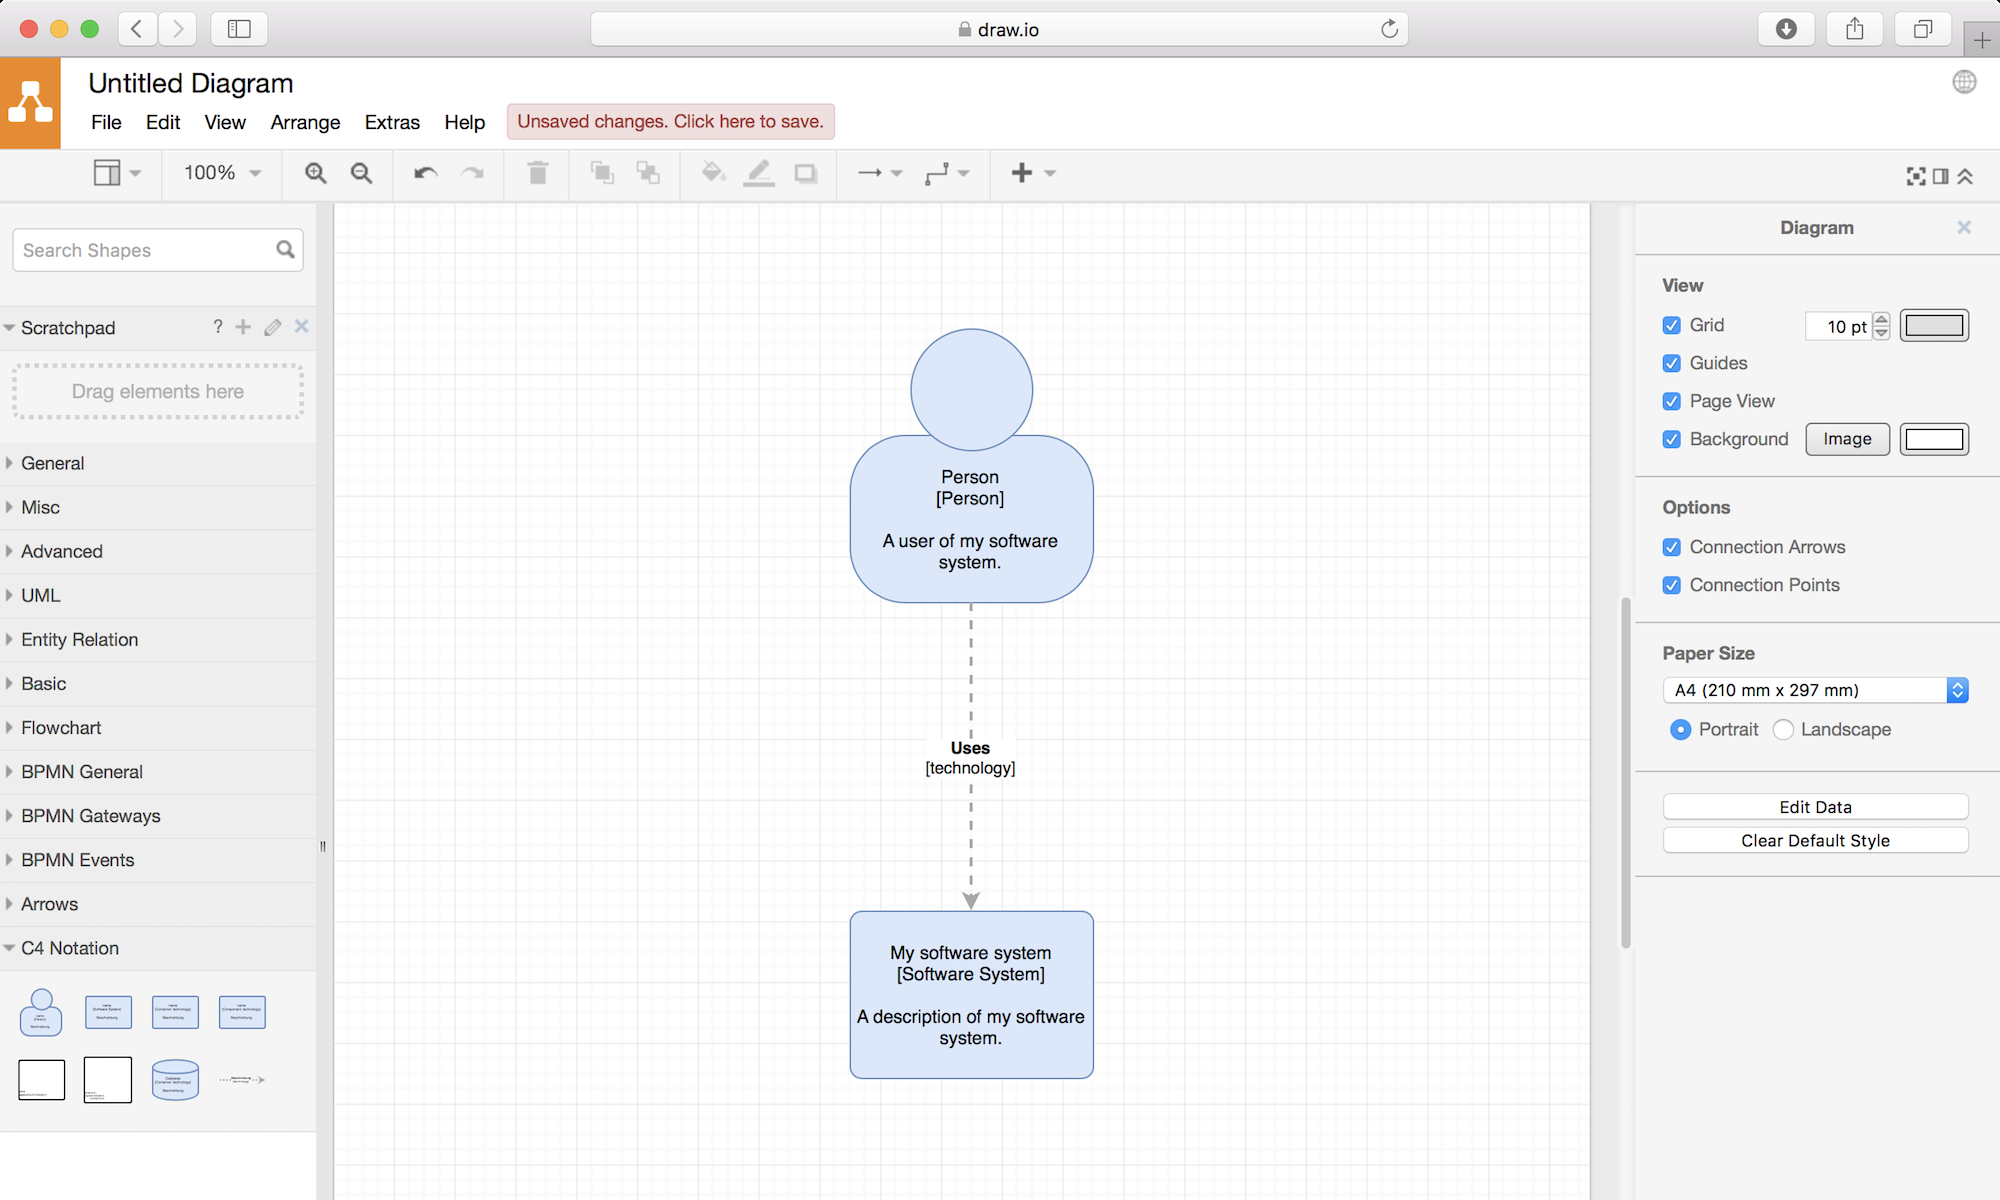 The C4 Model For Visualising Software Architecture in Er Diagram In Draw.io